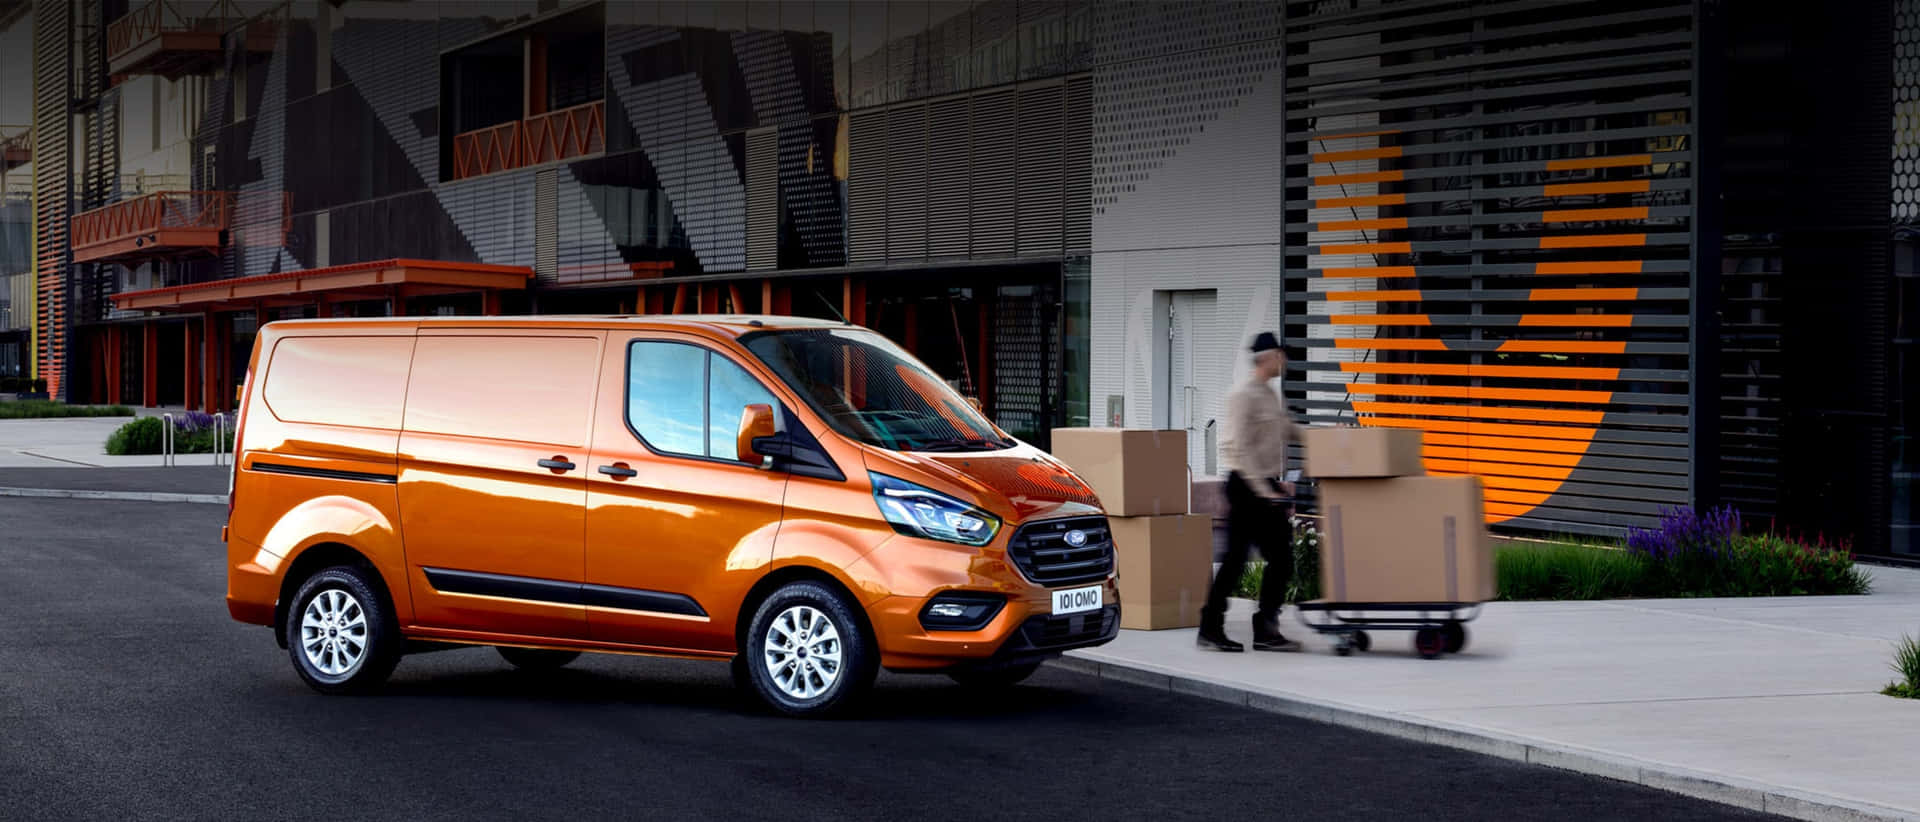 Introducing the Sleek and Spacious Ford Transit Wallpaper